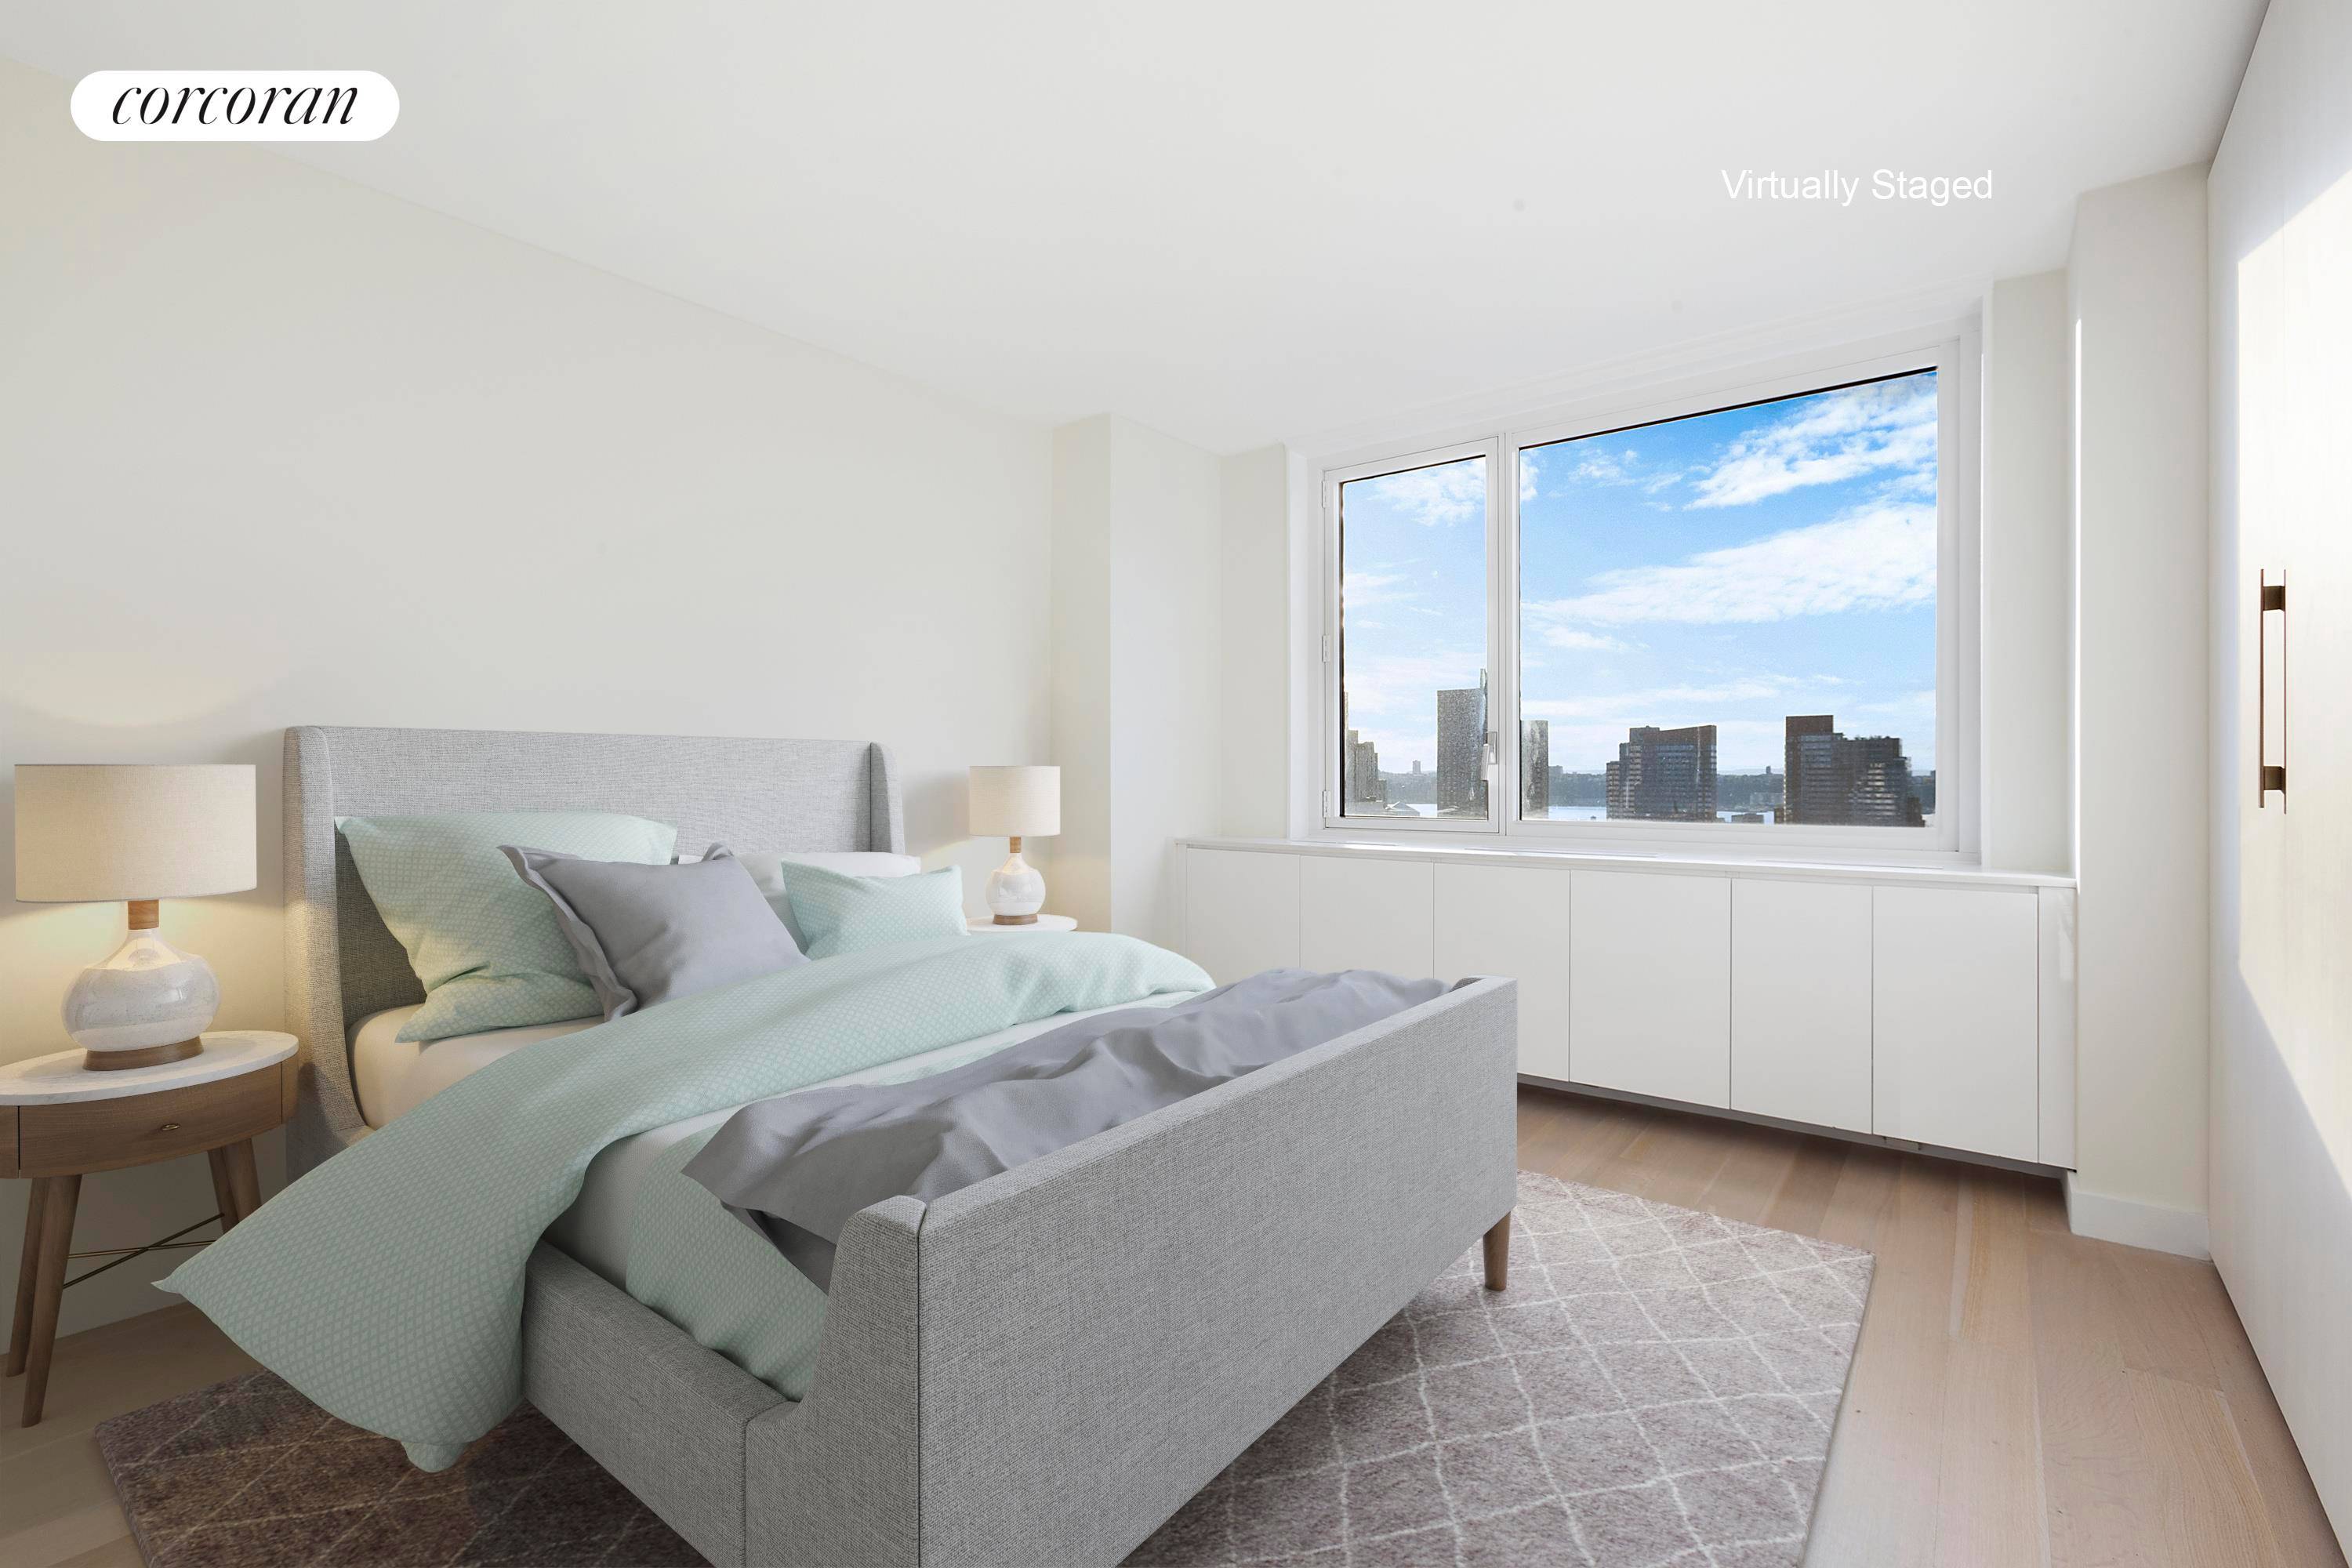 Spectacular high floor West facing views from a 2 3 bedroom, 2 bath home located at 301 West 53rd Street, situated in the heart of one of Manhattan's most vibrant ...